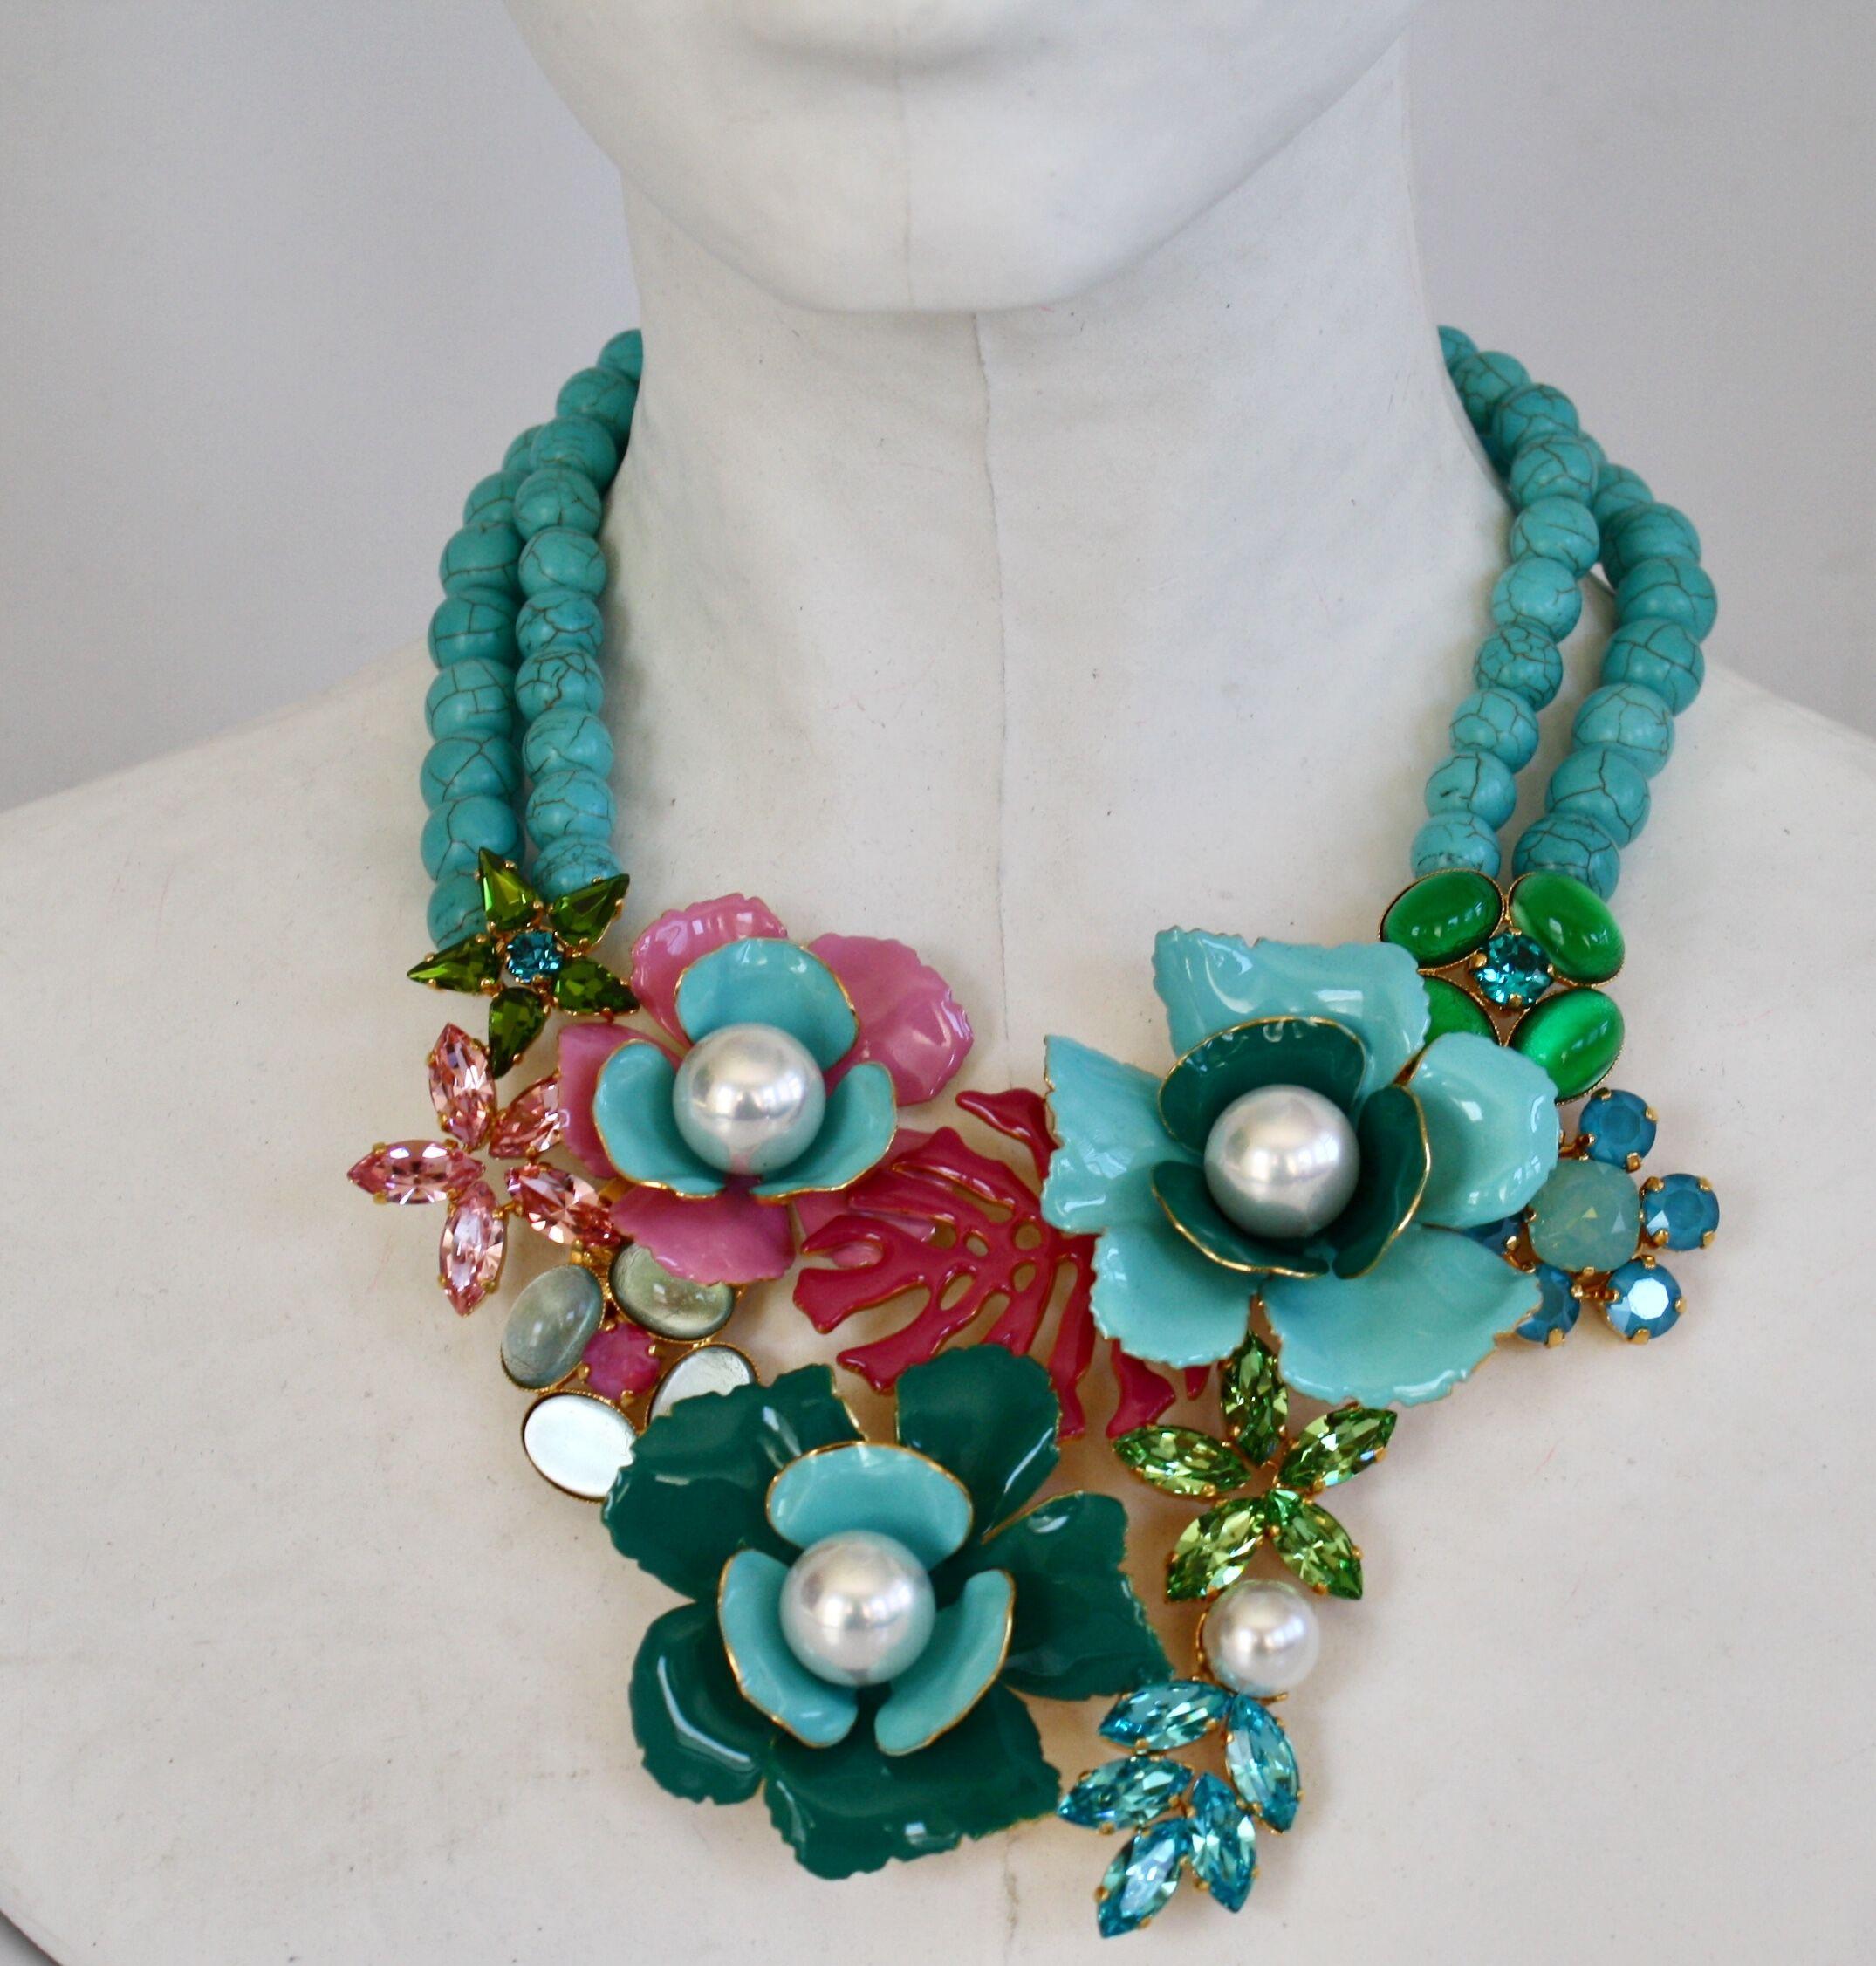 Turquoise bead necklace with enamel and Swarovski Crystal flowers from Philippe Ferrandis. 